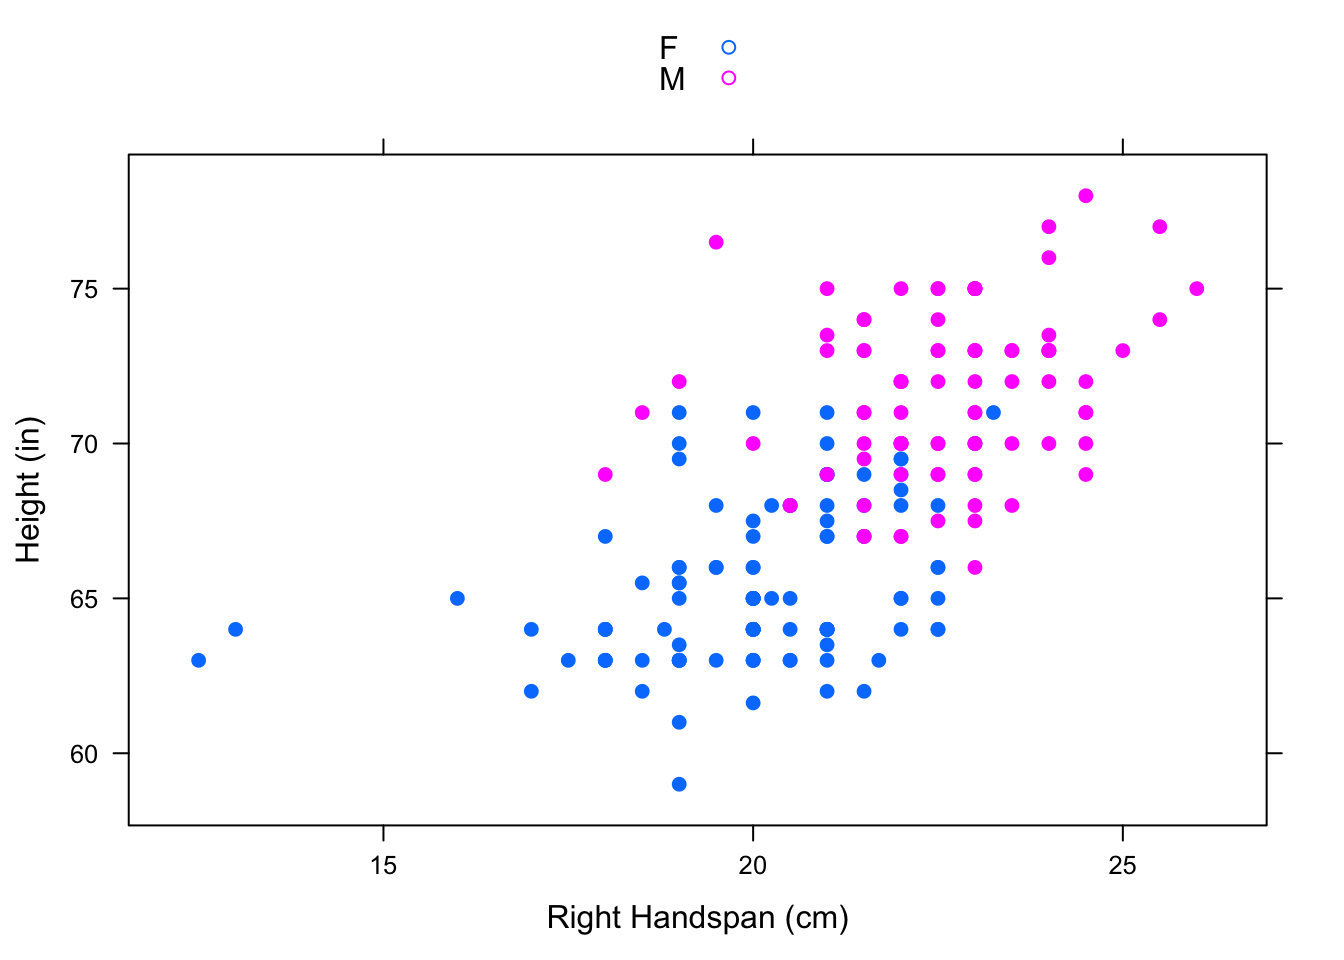 Overlayed Hand/Height by Sex:  One scatterplot showing the relationship between right handspan and height colored by sex.